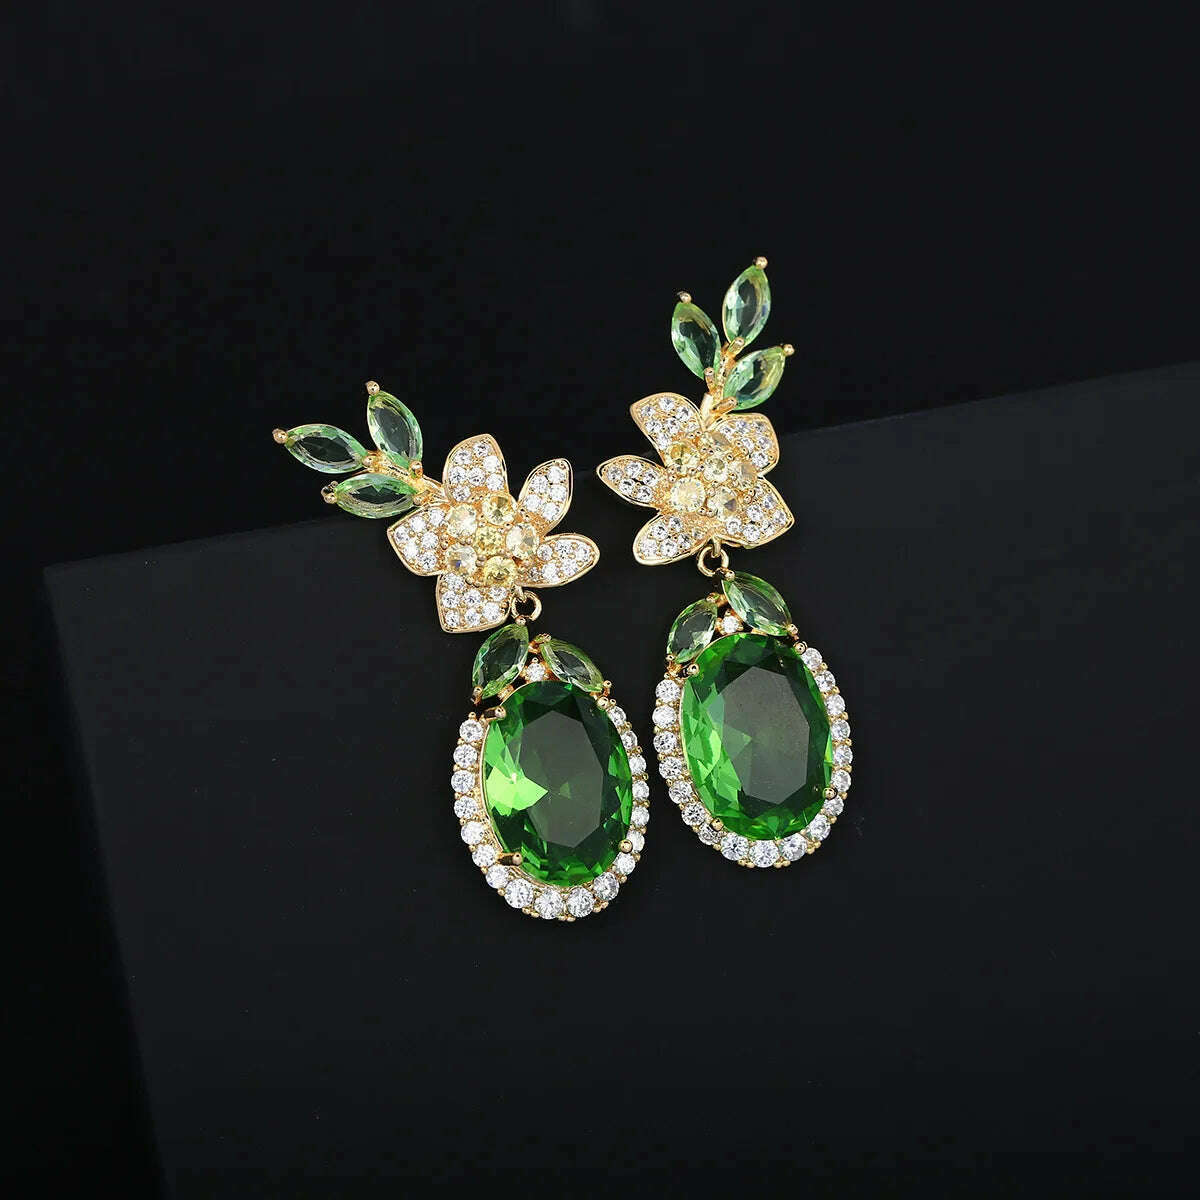 KIMLUD, Bilincolor Blossoming Flower  Lightweight Water Drop Shaped Zircon Earrings for Chrismas’ Gift, KIMLUD Women's Clothes